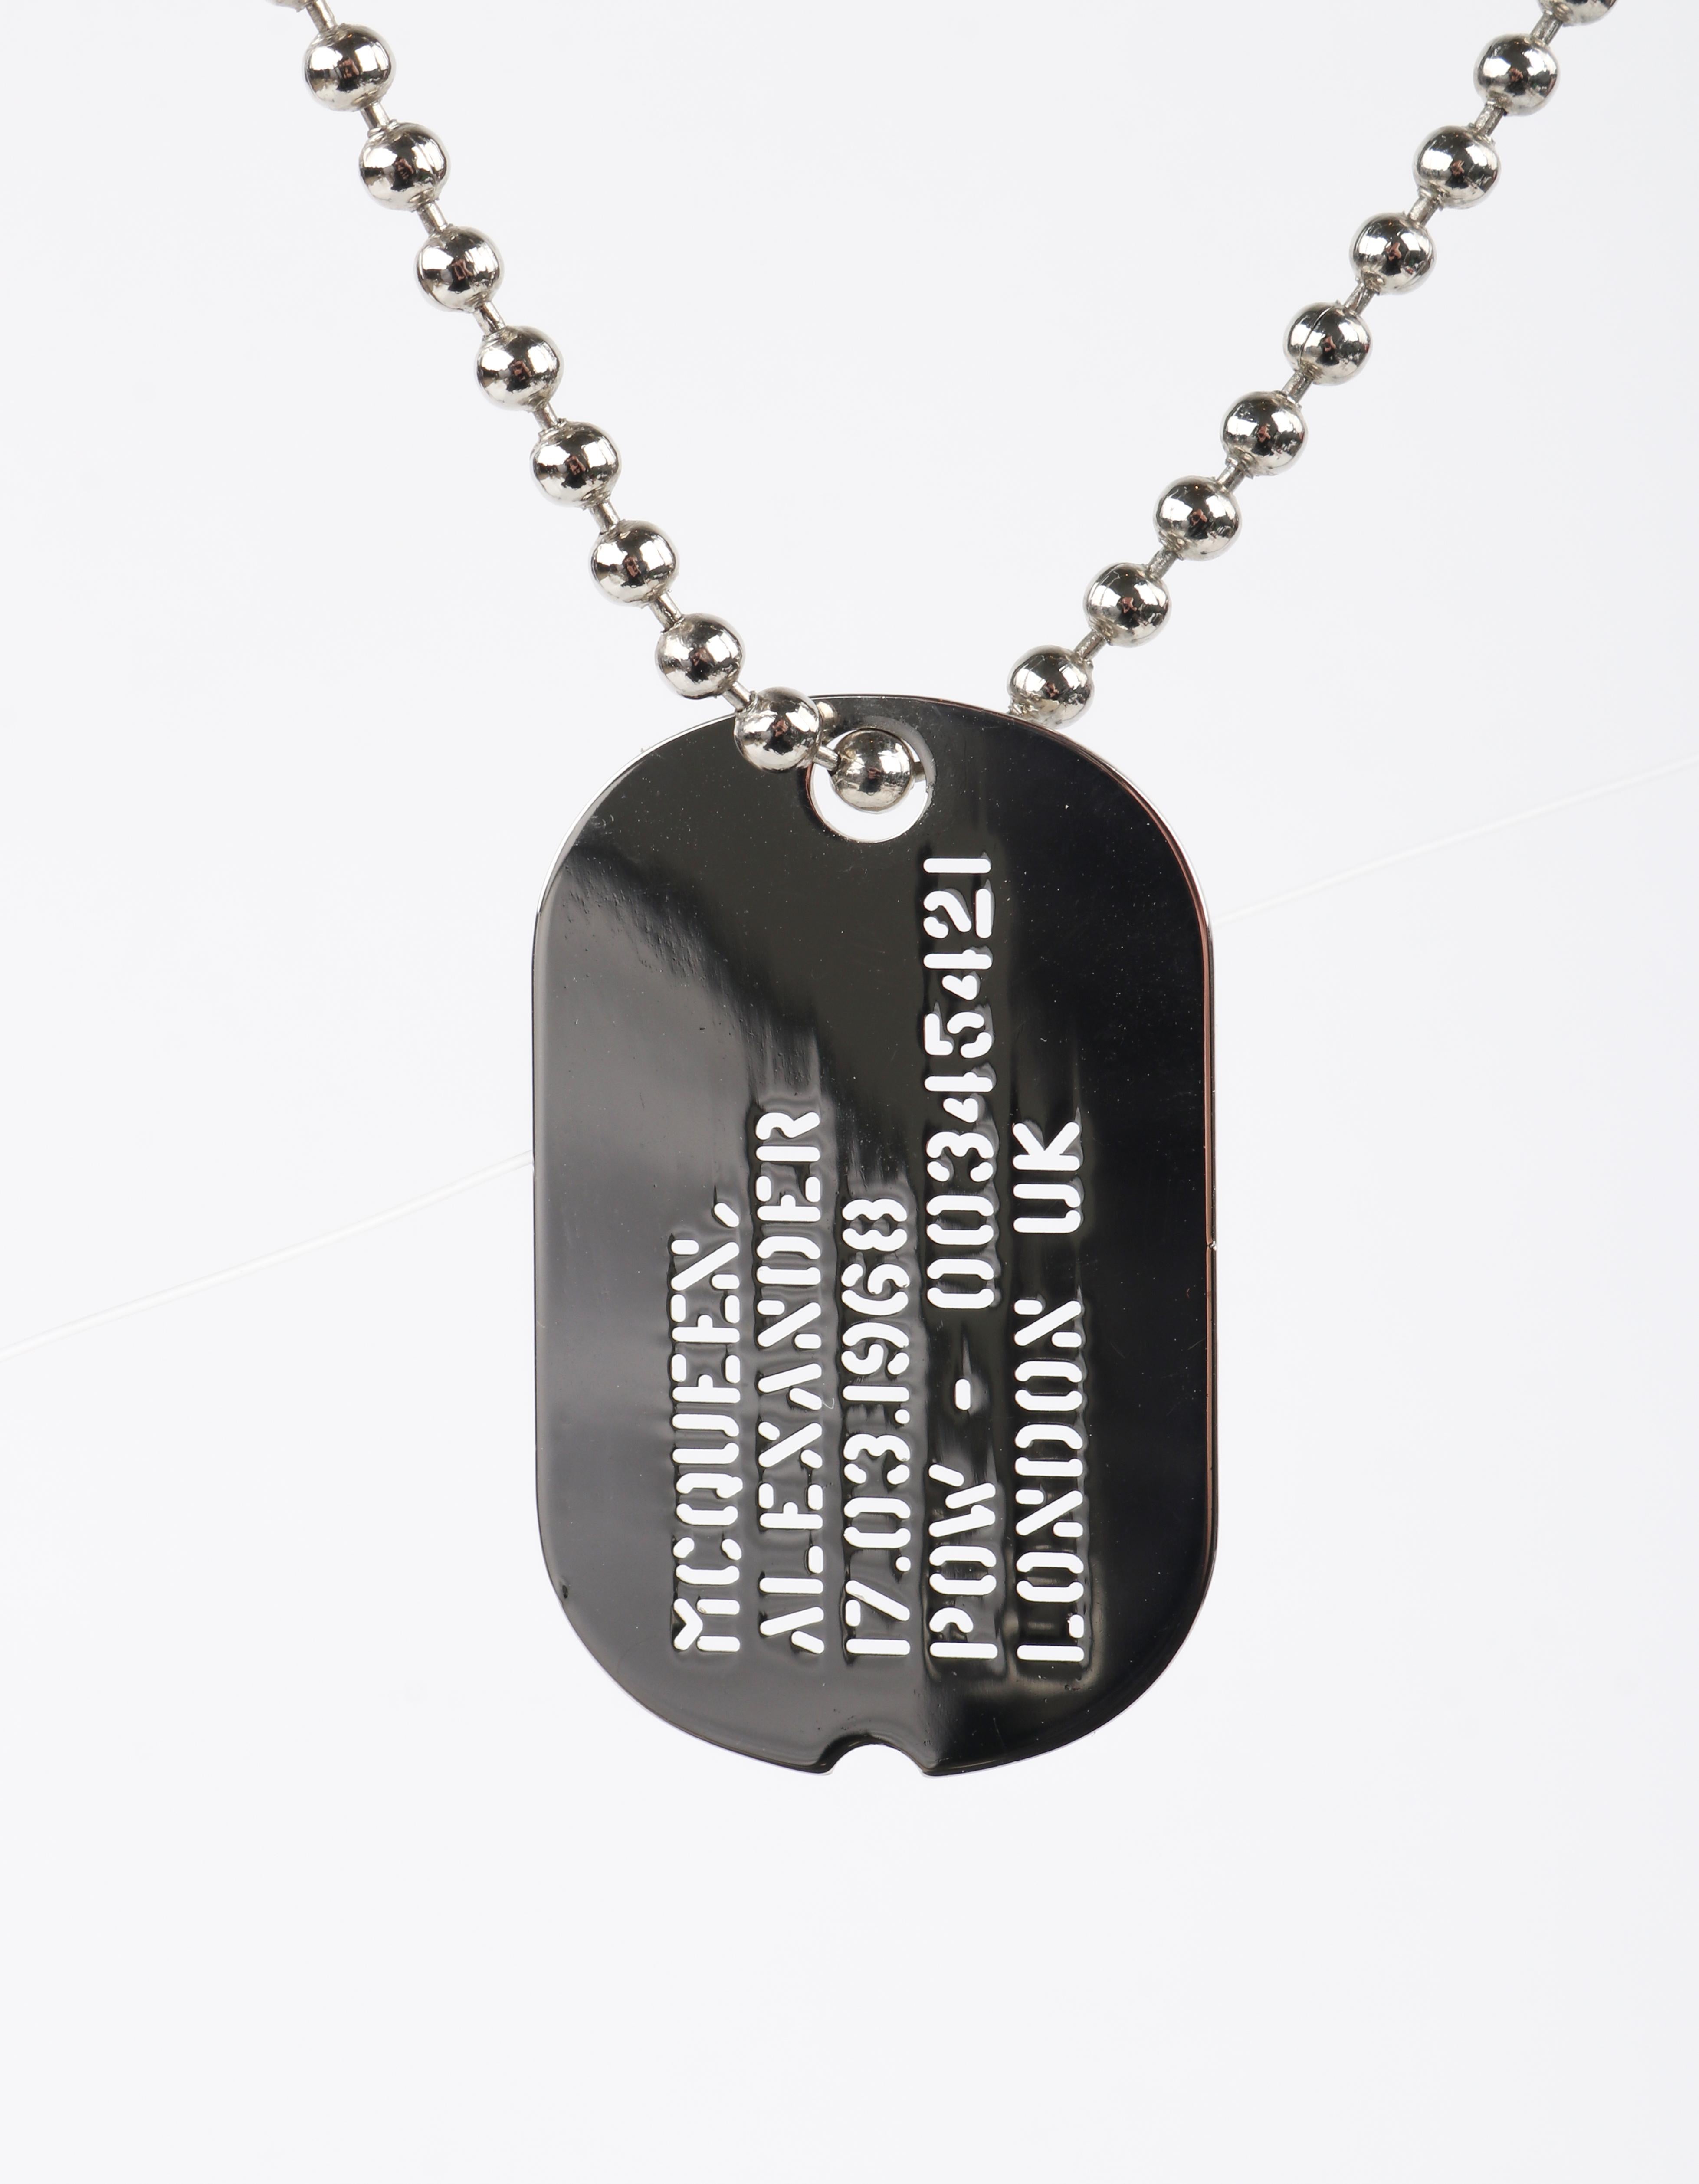 ALEXANDER McQUEEN A/W 2005 Silver Bead Chain Military Dog Tag Pendant Necklace

Brand / Manufacturer: Alexander McQueen
Collection: A/W 2005 